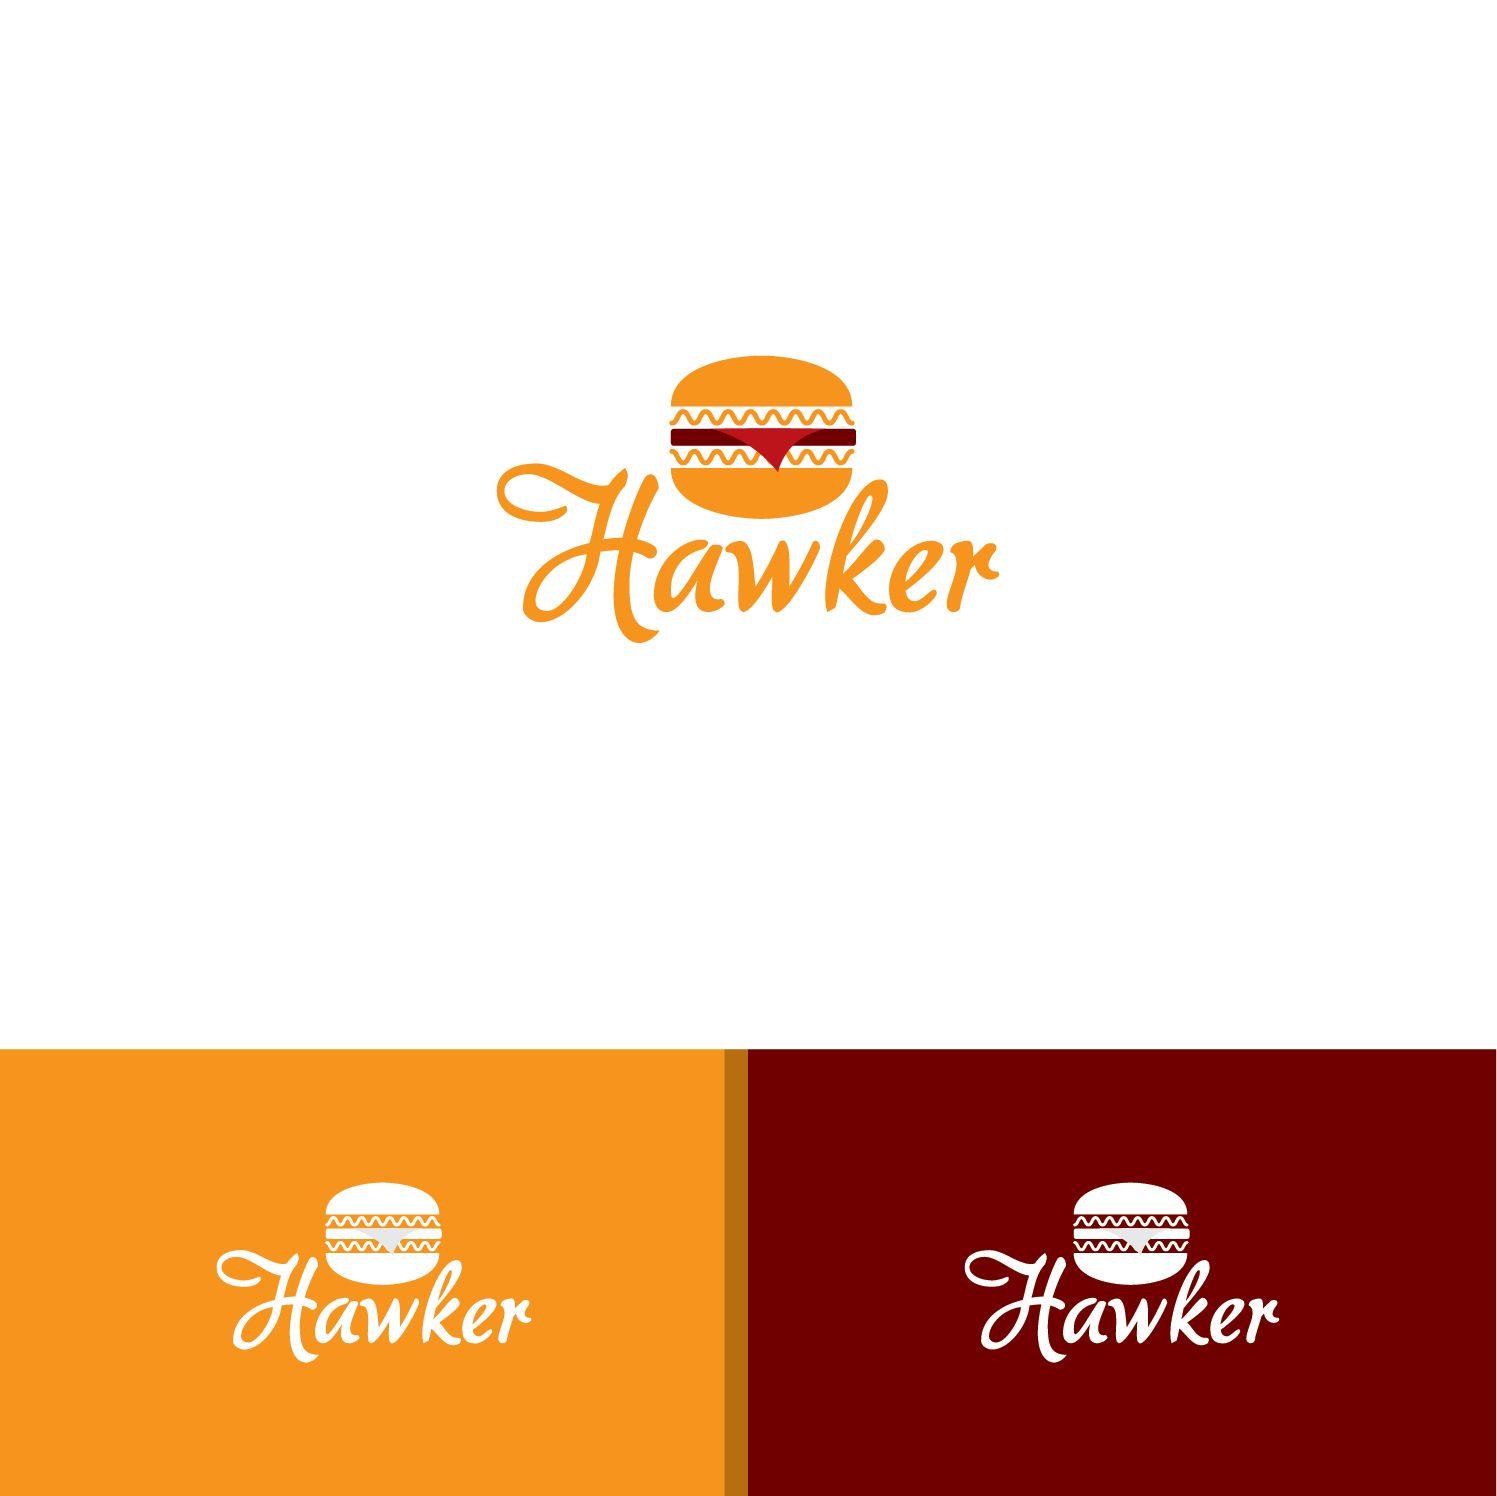 Food Chain Logo - Modern, Conservative, Fast Food Chain Logo Design for Hawker by ...